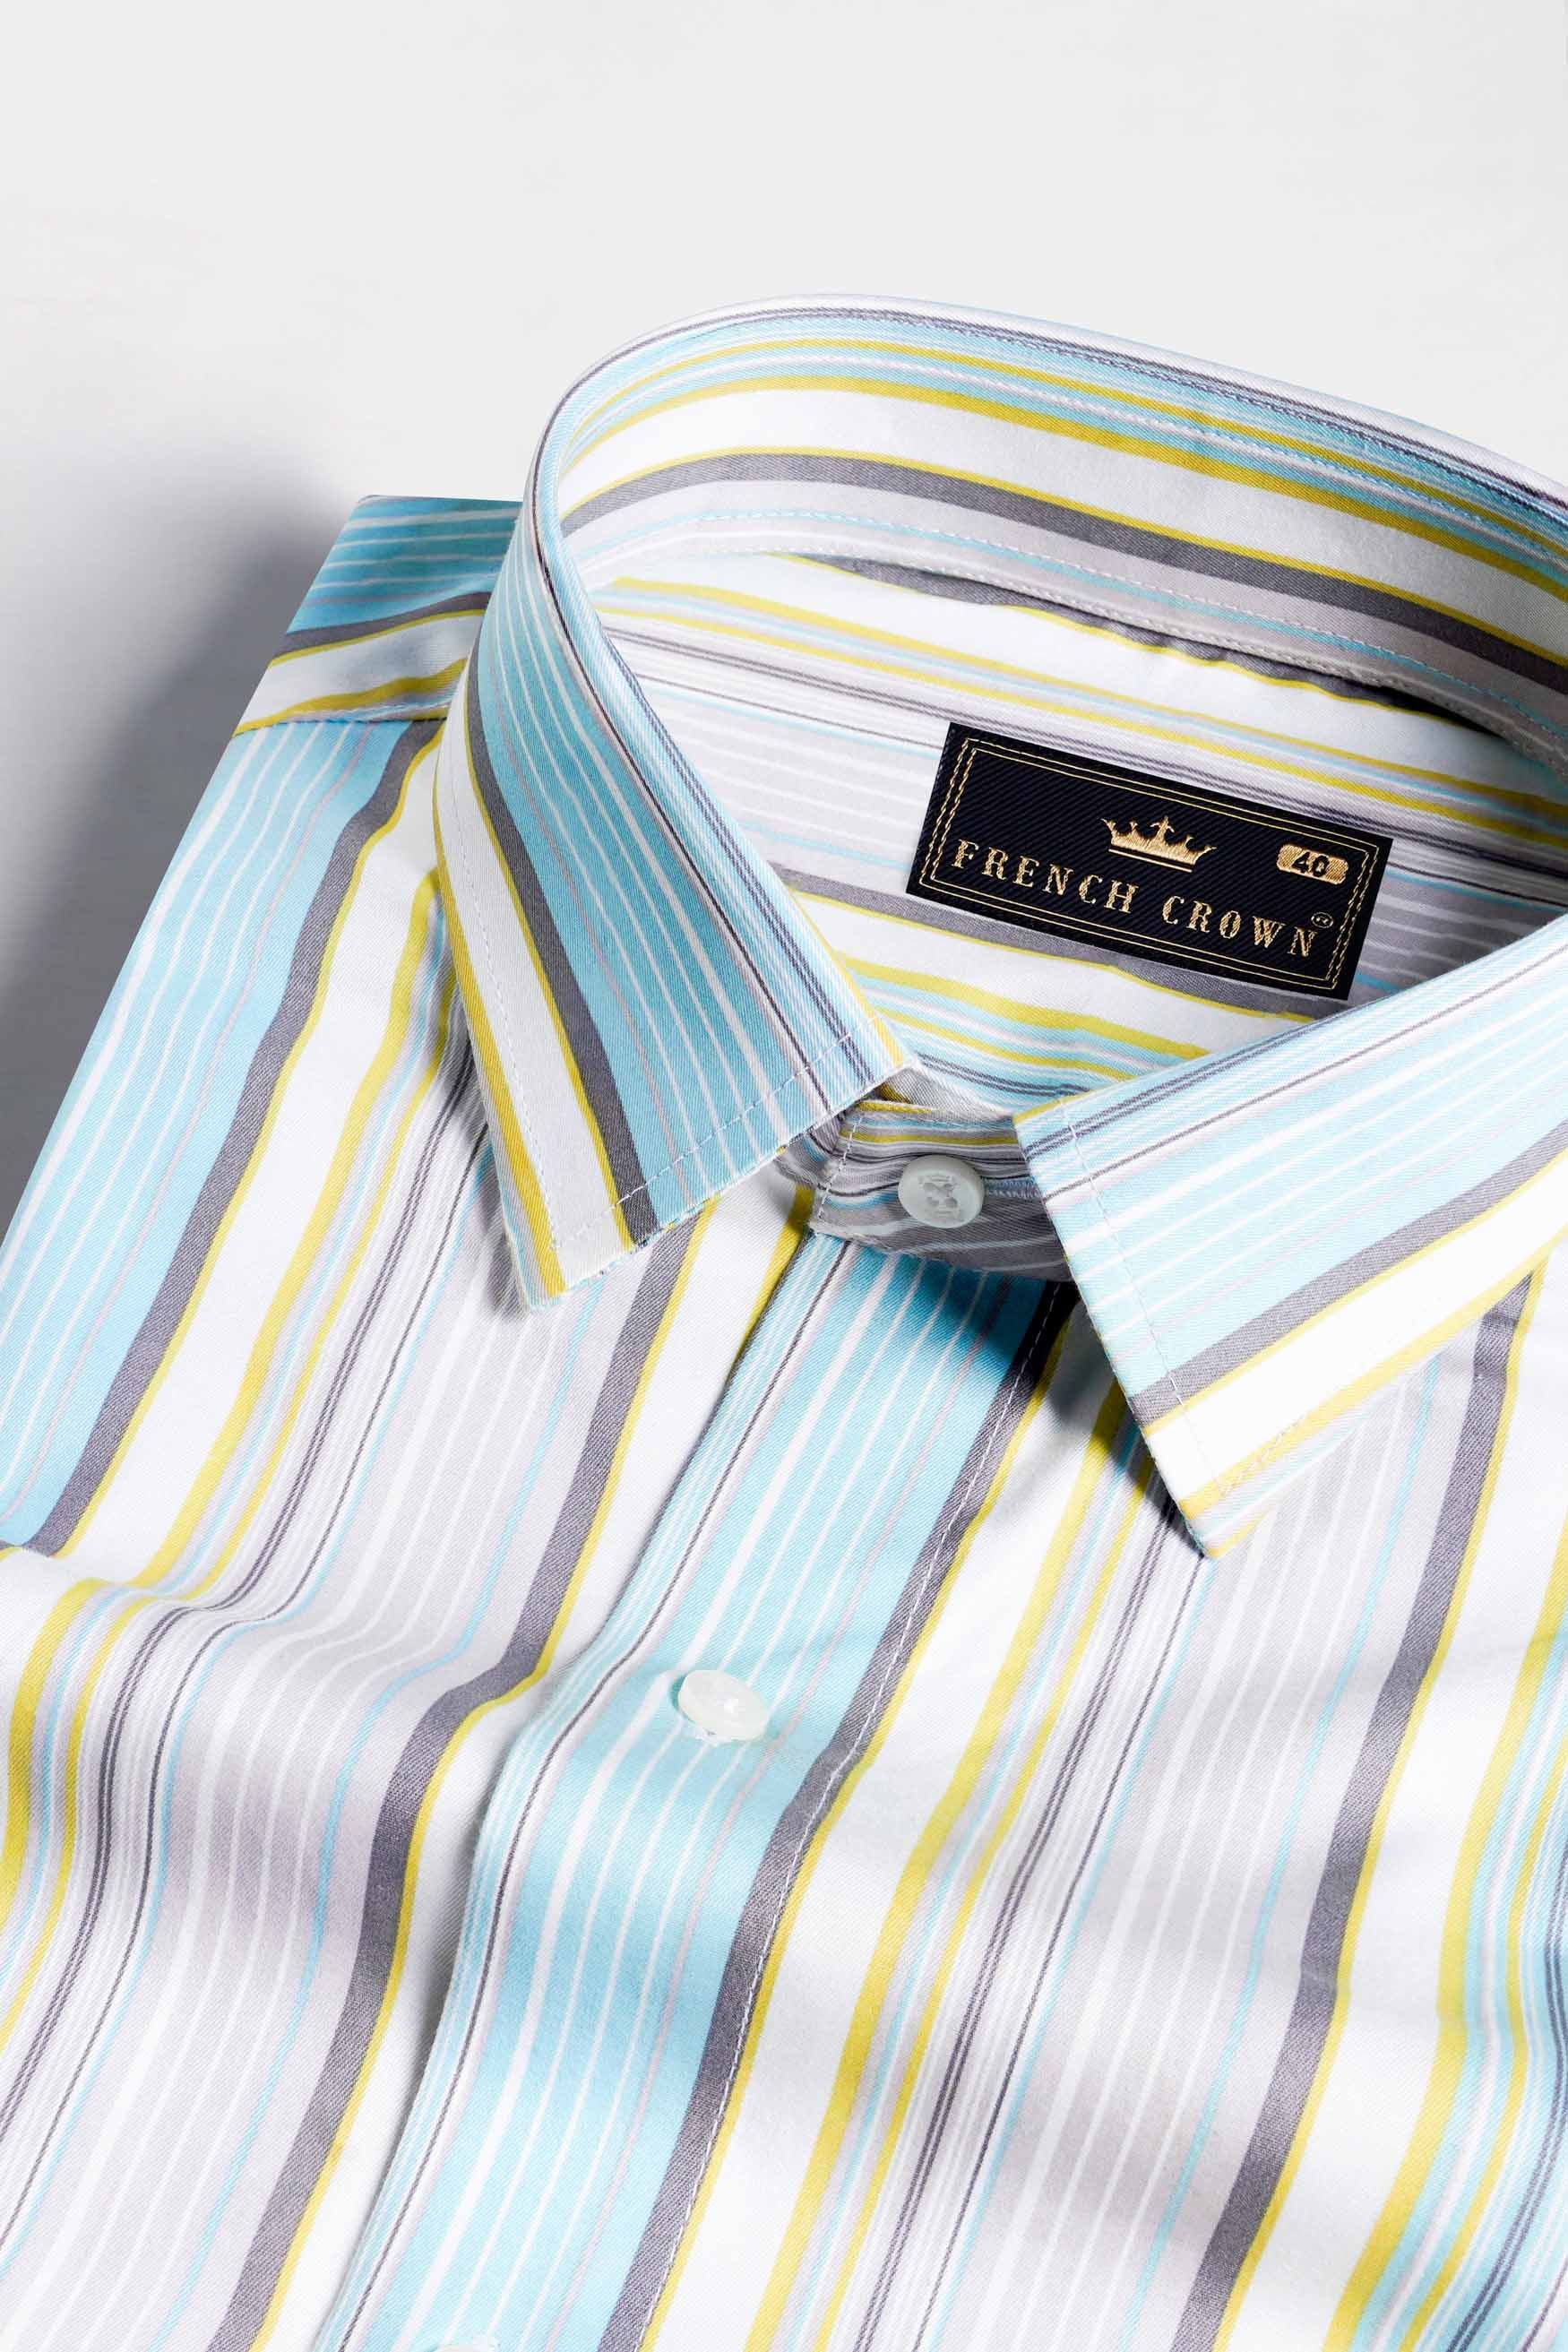 Tiffany Blue with Buff Yellow and White Striped Subtle Sheen Super Soft Premium Cotton Shirt 11596-38, 11596-H-38, 11596-39, 11596-H-39, 11596-40, 11596-H-40, 11596-42, 11596-H-42, 11596-44, 11596-H-44, 11596-46, 11596-H-46, 11596-48, 11596-H-48, 11596-50, 11596-H-50, 11596-52, 11596-H-52